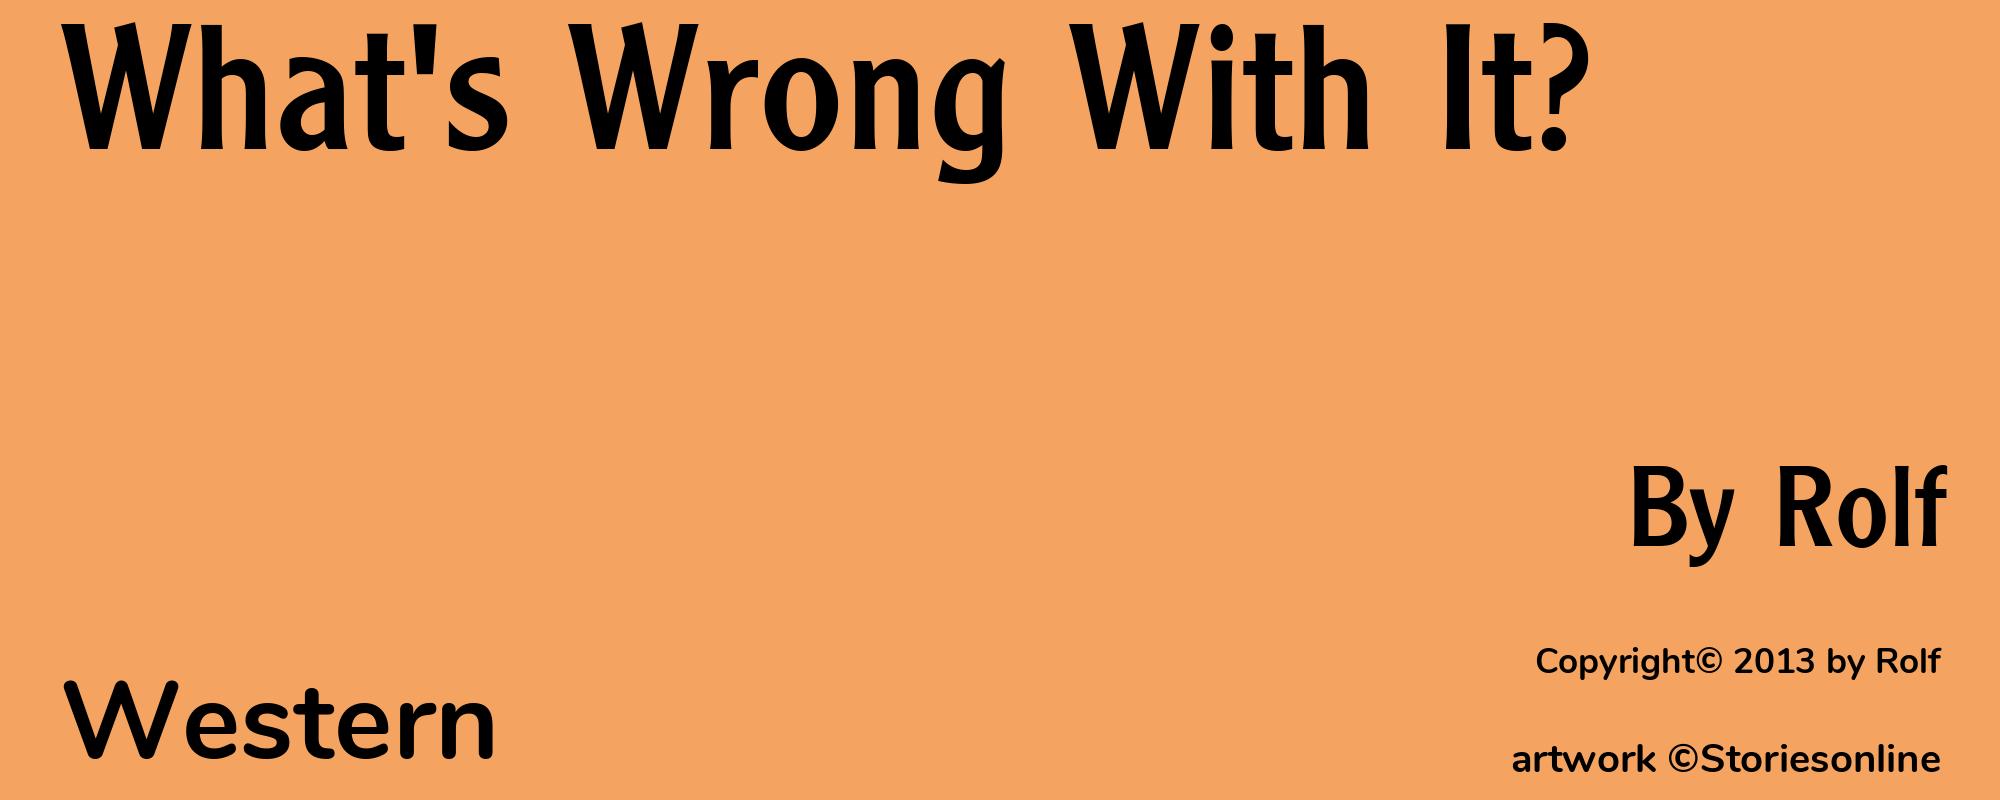 What's Wrong With It? - Cover